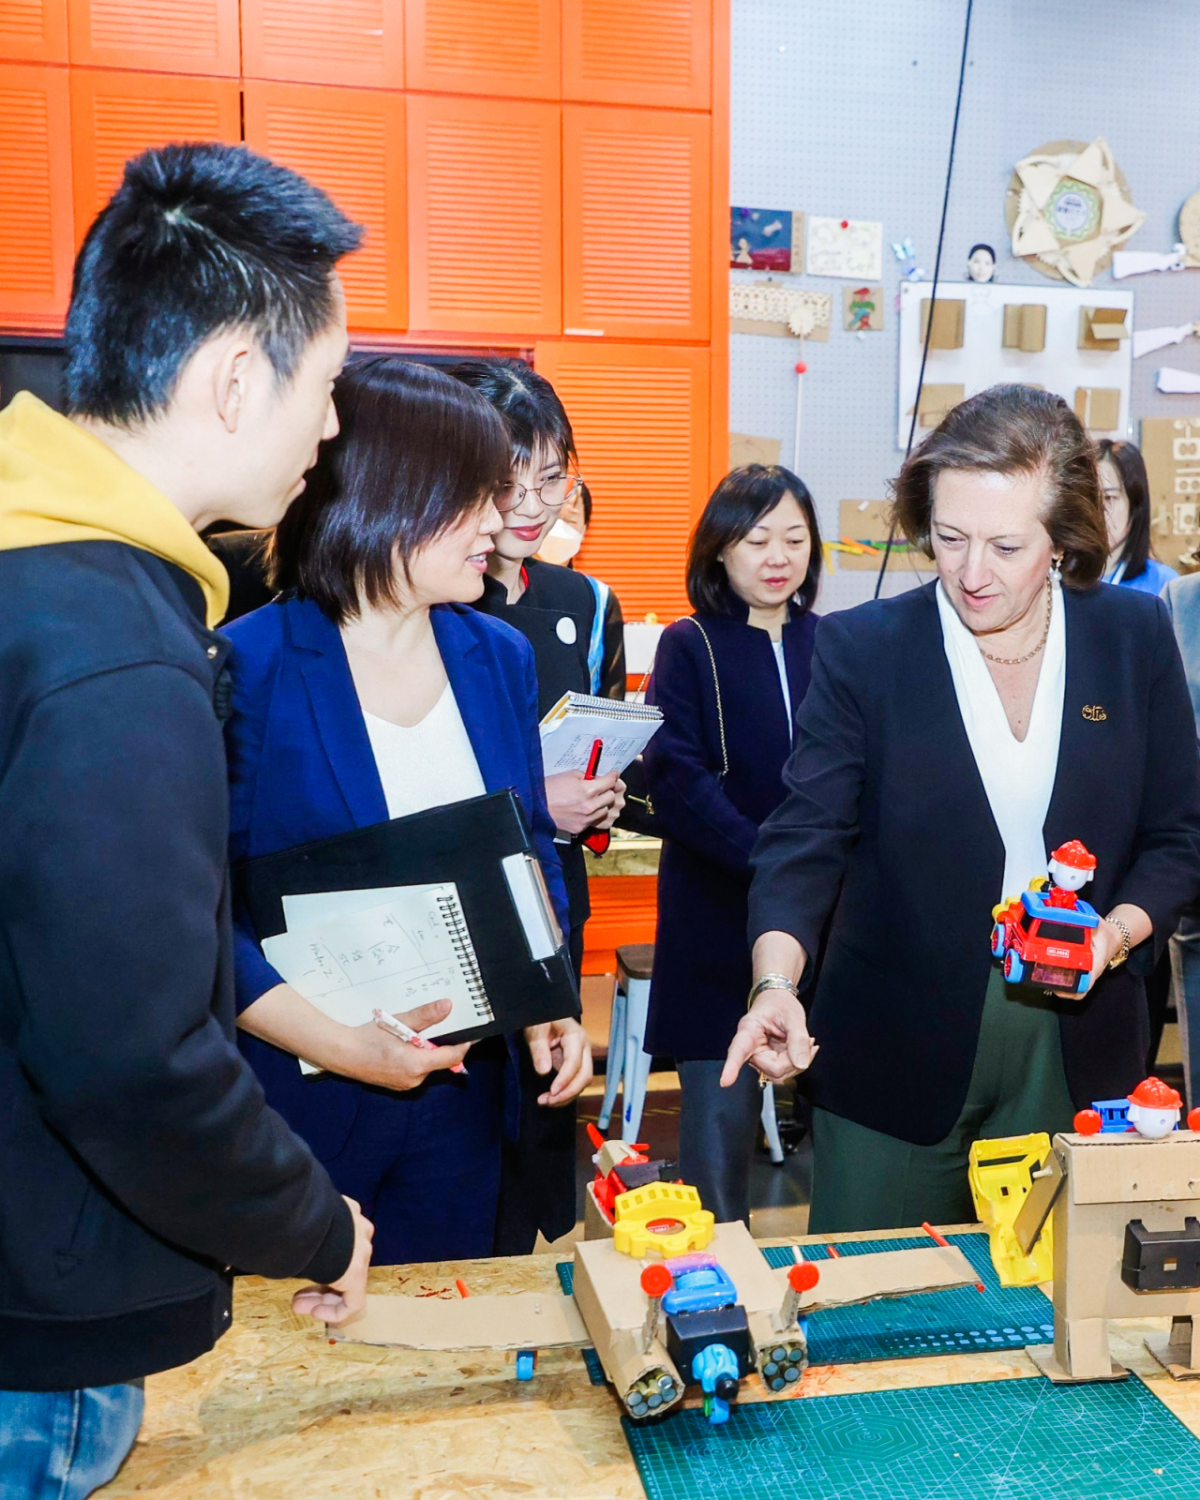 Otis Chair, CEO & President Judy Marks tours a youth innovation zone made possible by the China Soong Ching Ling Foundation. The non-governmental organization and Otis announced a partnership that will deliver scholarships to outstanding female university students with a focus on Science, Technology, Engineering and Math (STEM). The funding will also support STEM innovation programs for youth